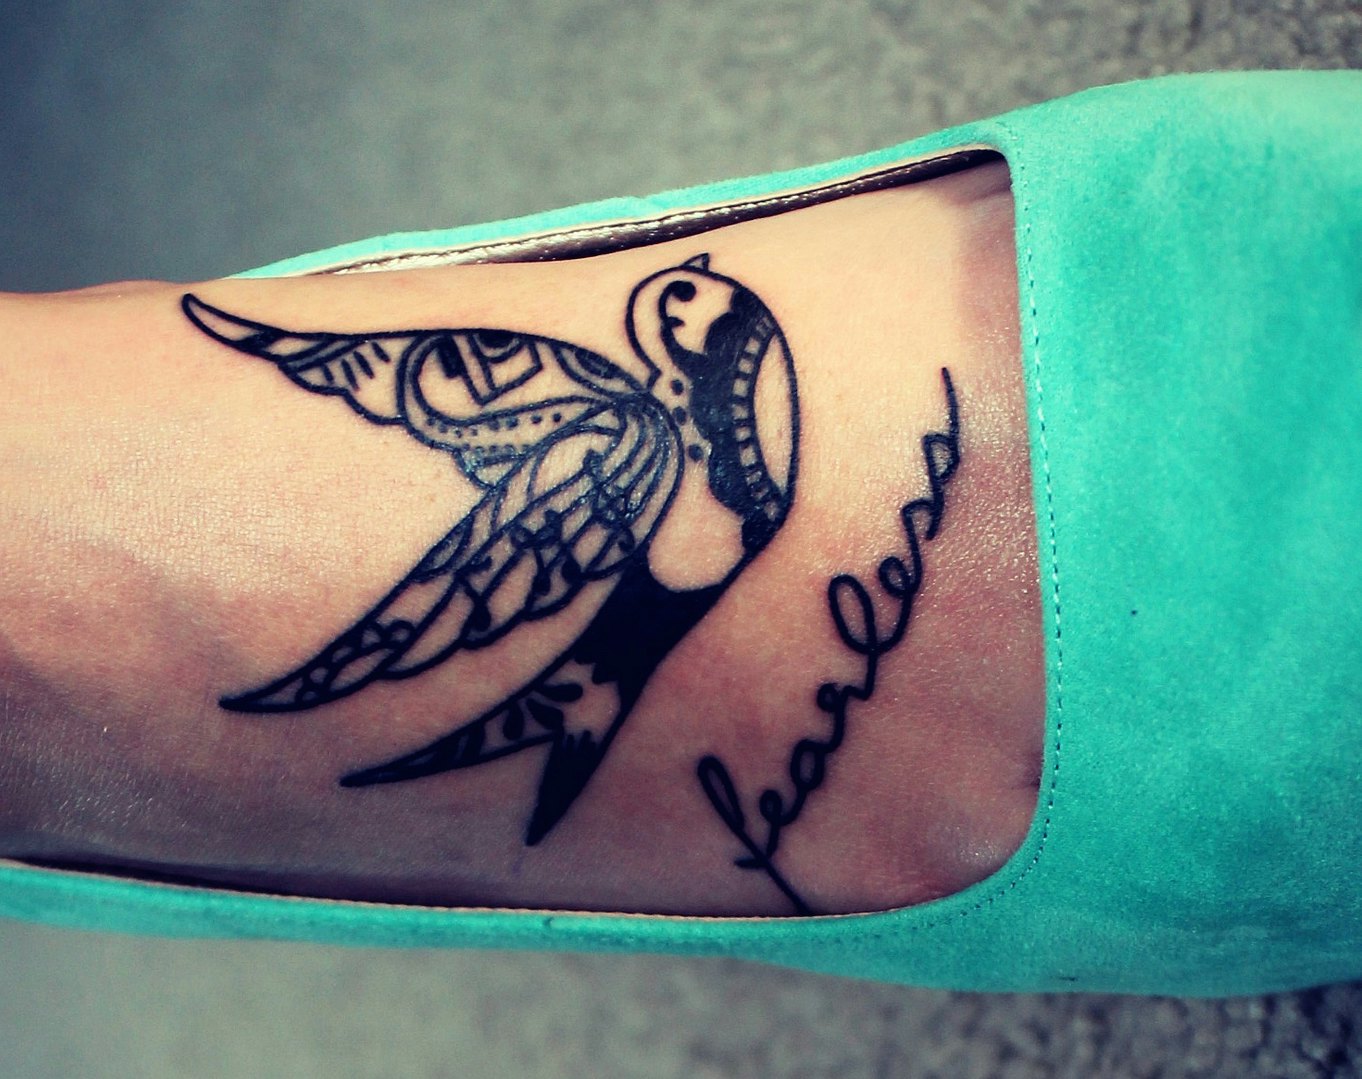 17 Powerful One Word Tattoos That Prove A Single Word Can Make A